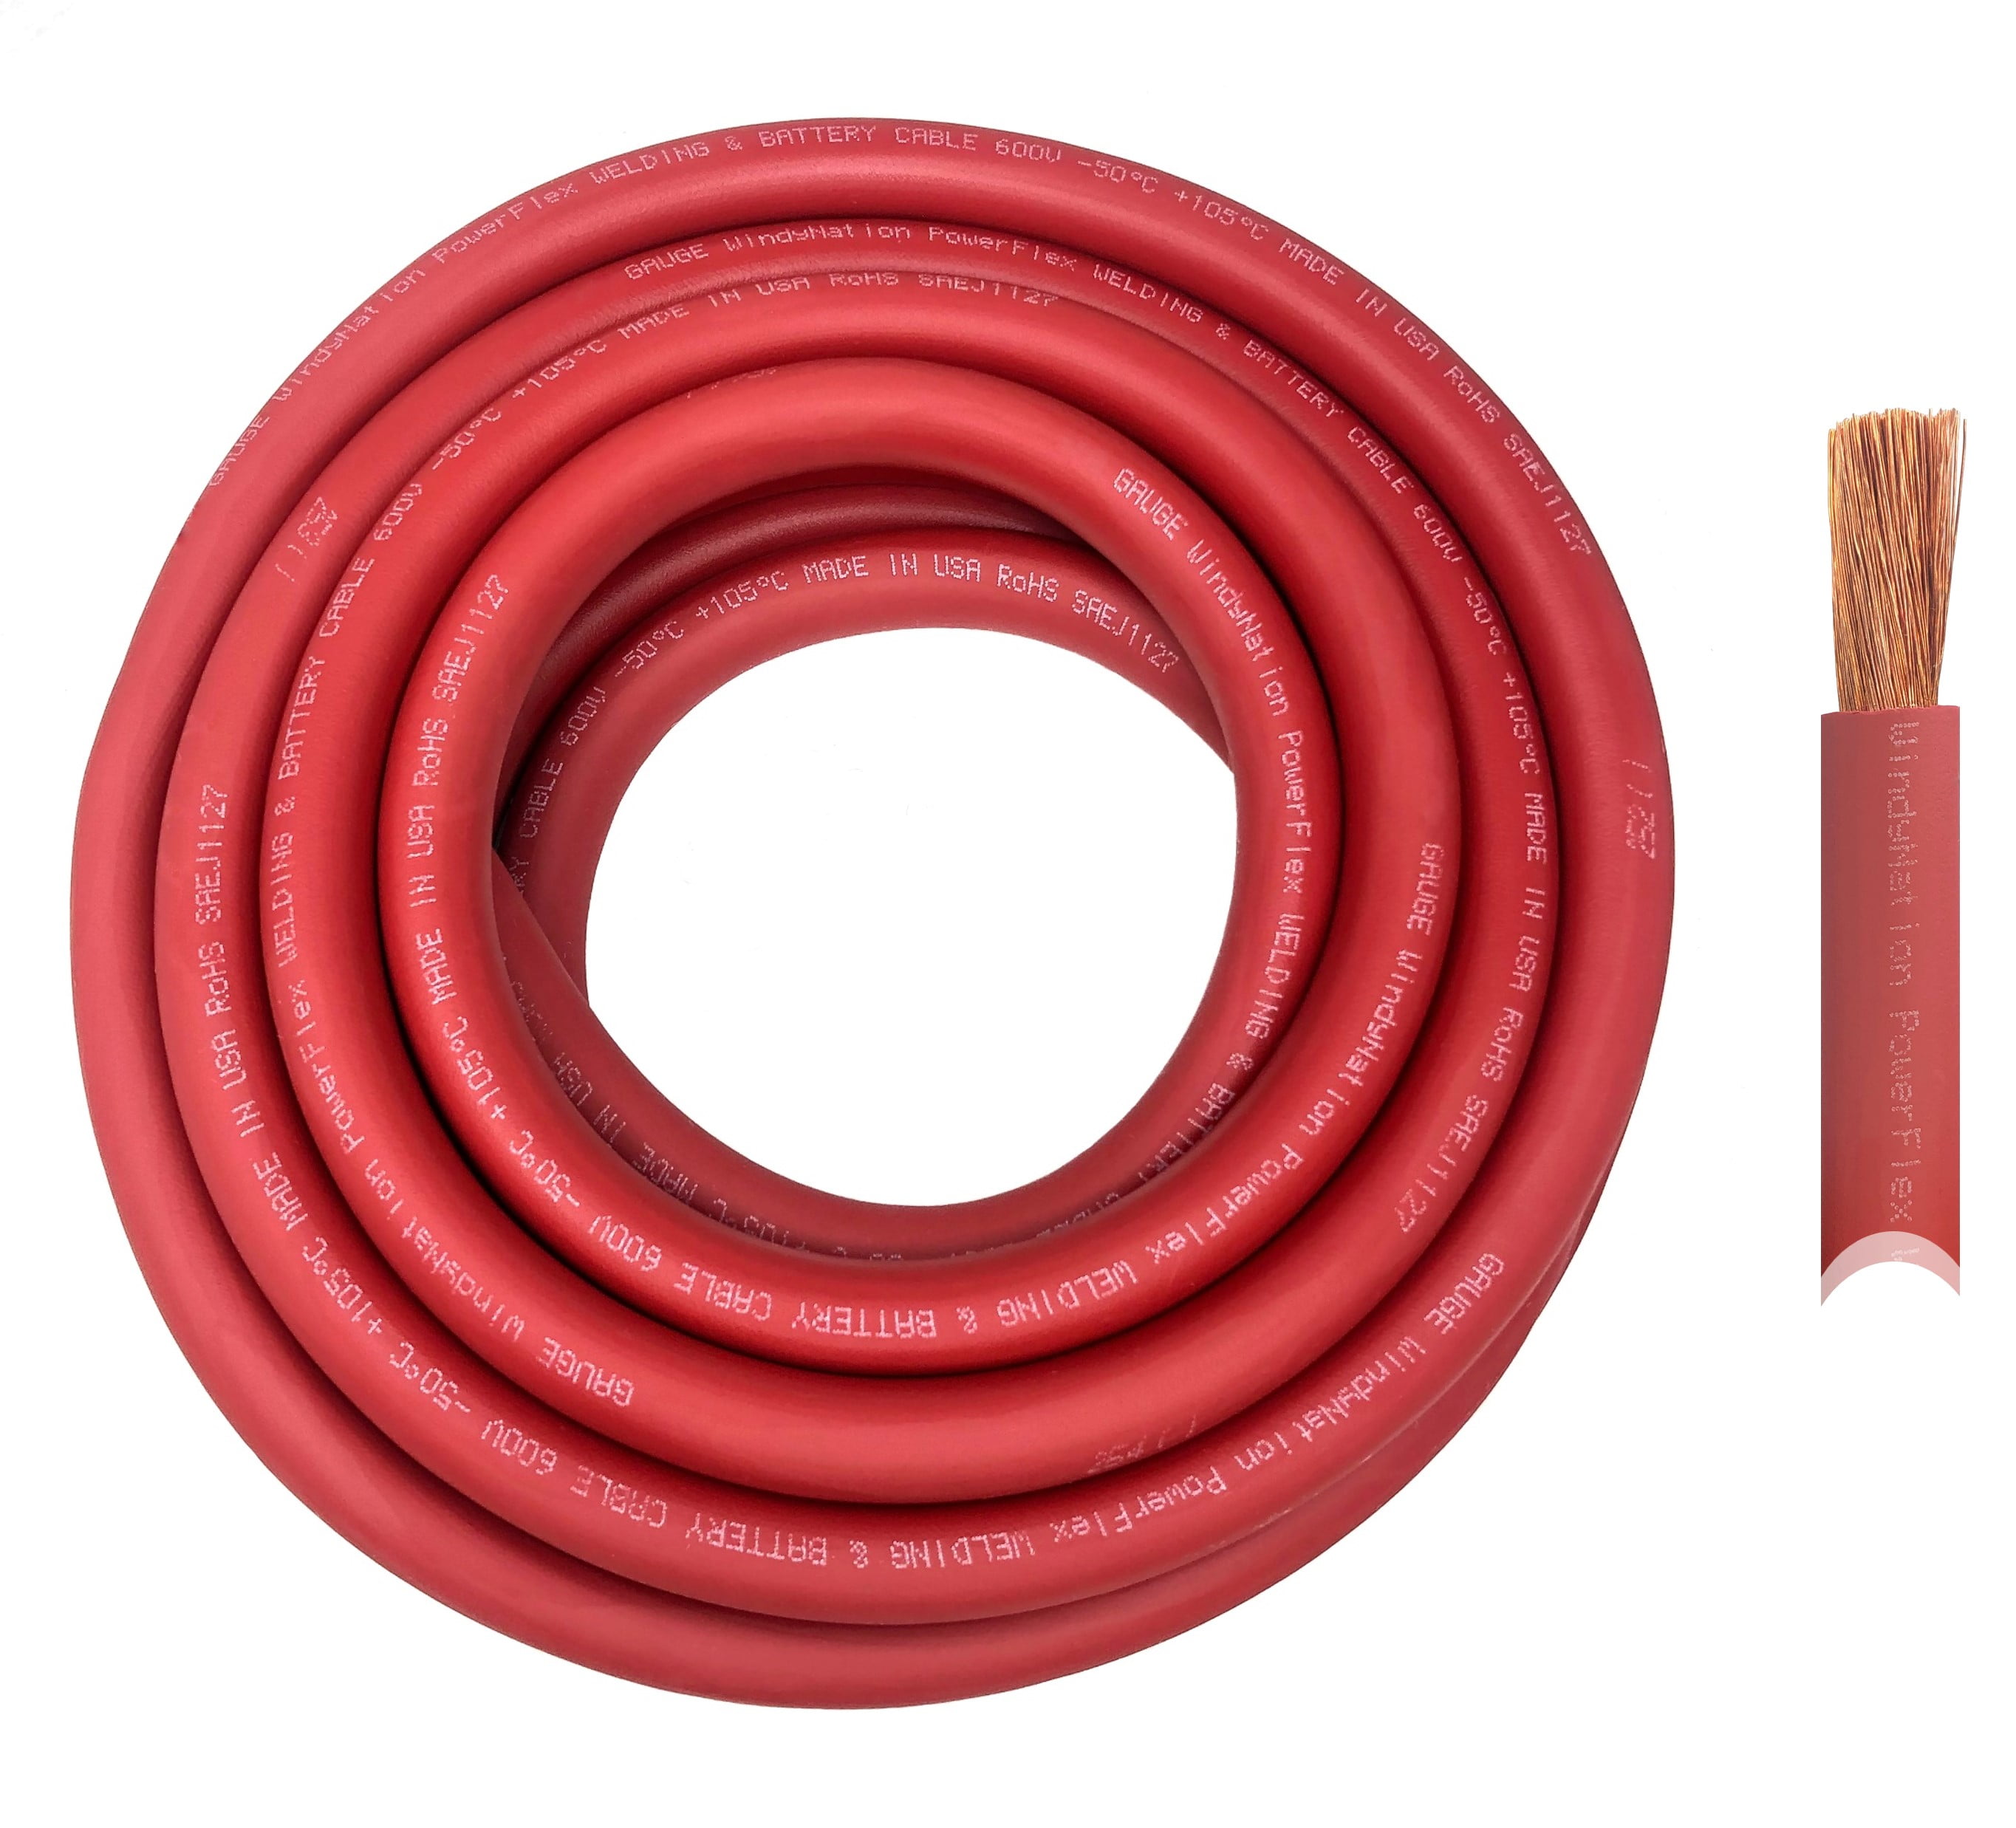 40 Feet Red Battery Welding Pure Copper Ultra Flexible Cable 3 Feet Heat Shrink Tubing 5pcs of 5/16 & 5pcs 3/8 Copper Cable Lug Terminal Connectors WNI 4 AWG 4 Gauge 40 Feet Black 